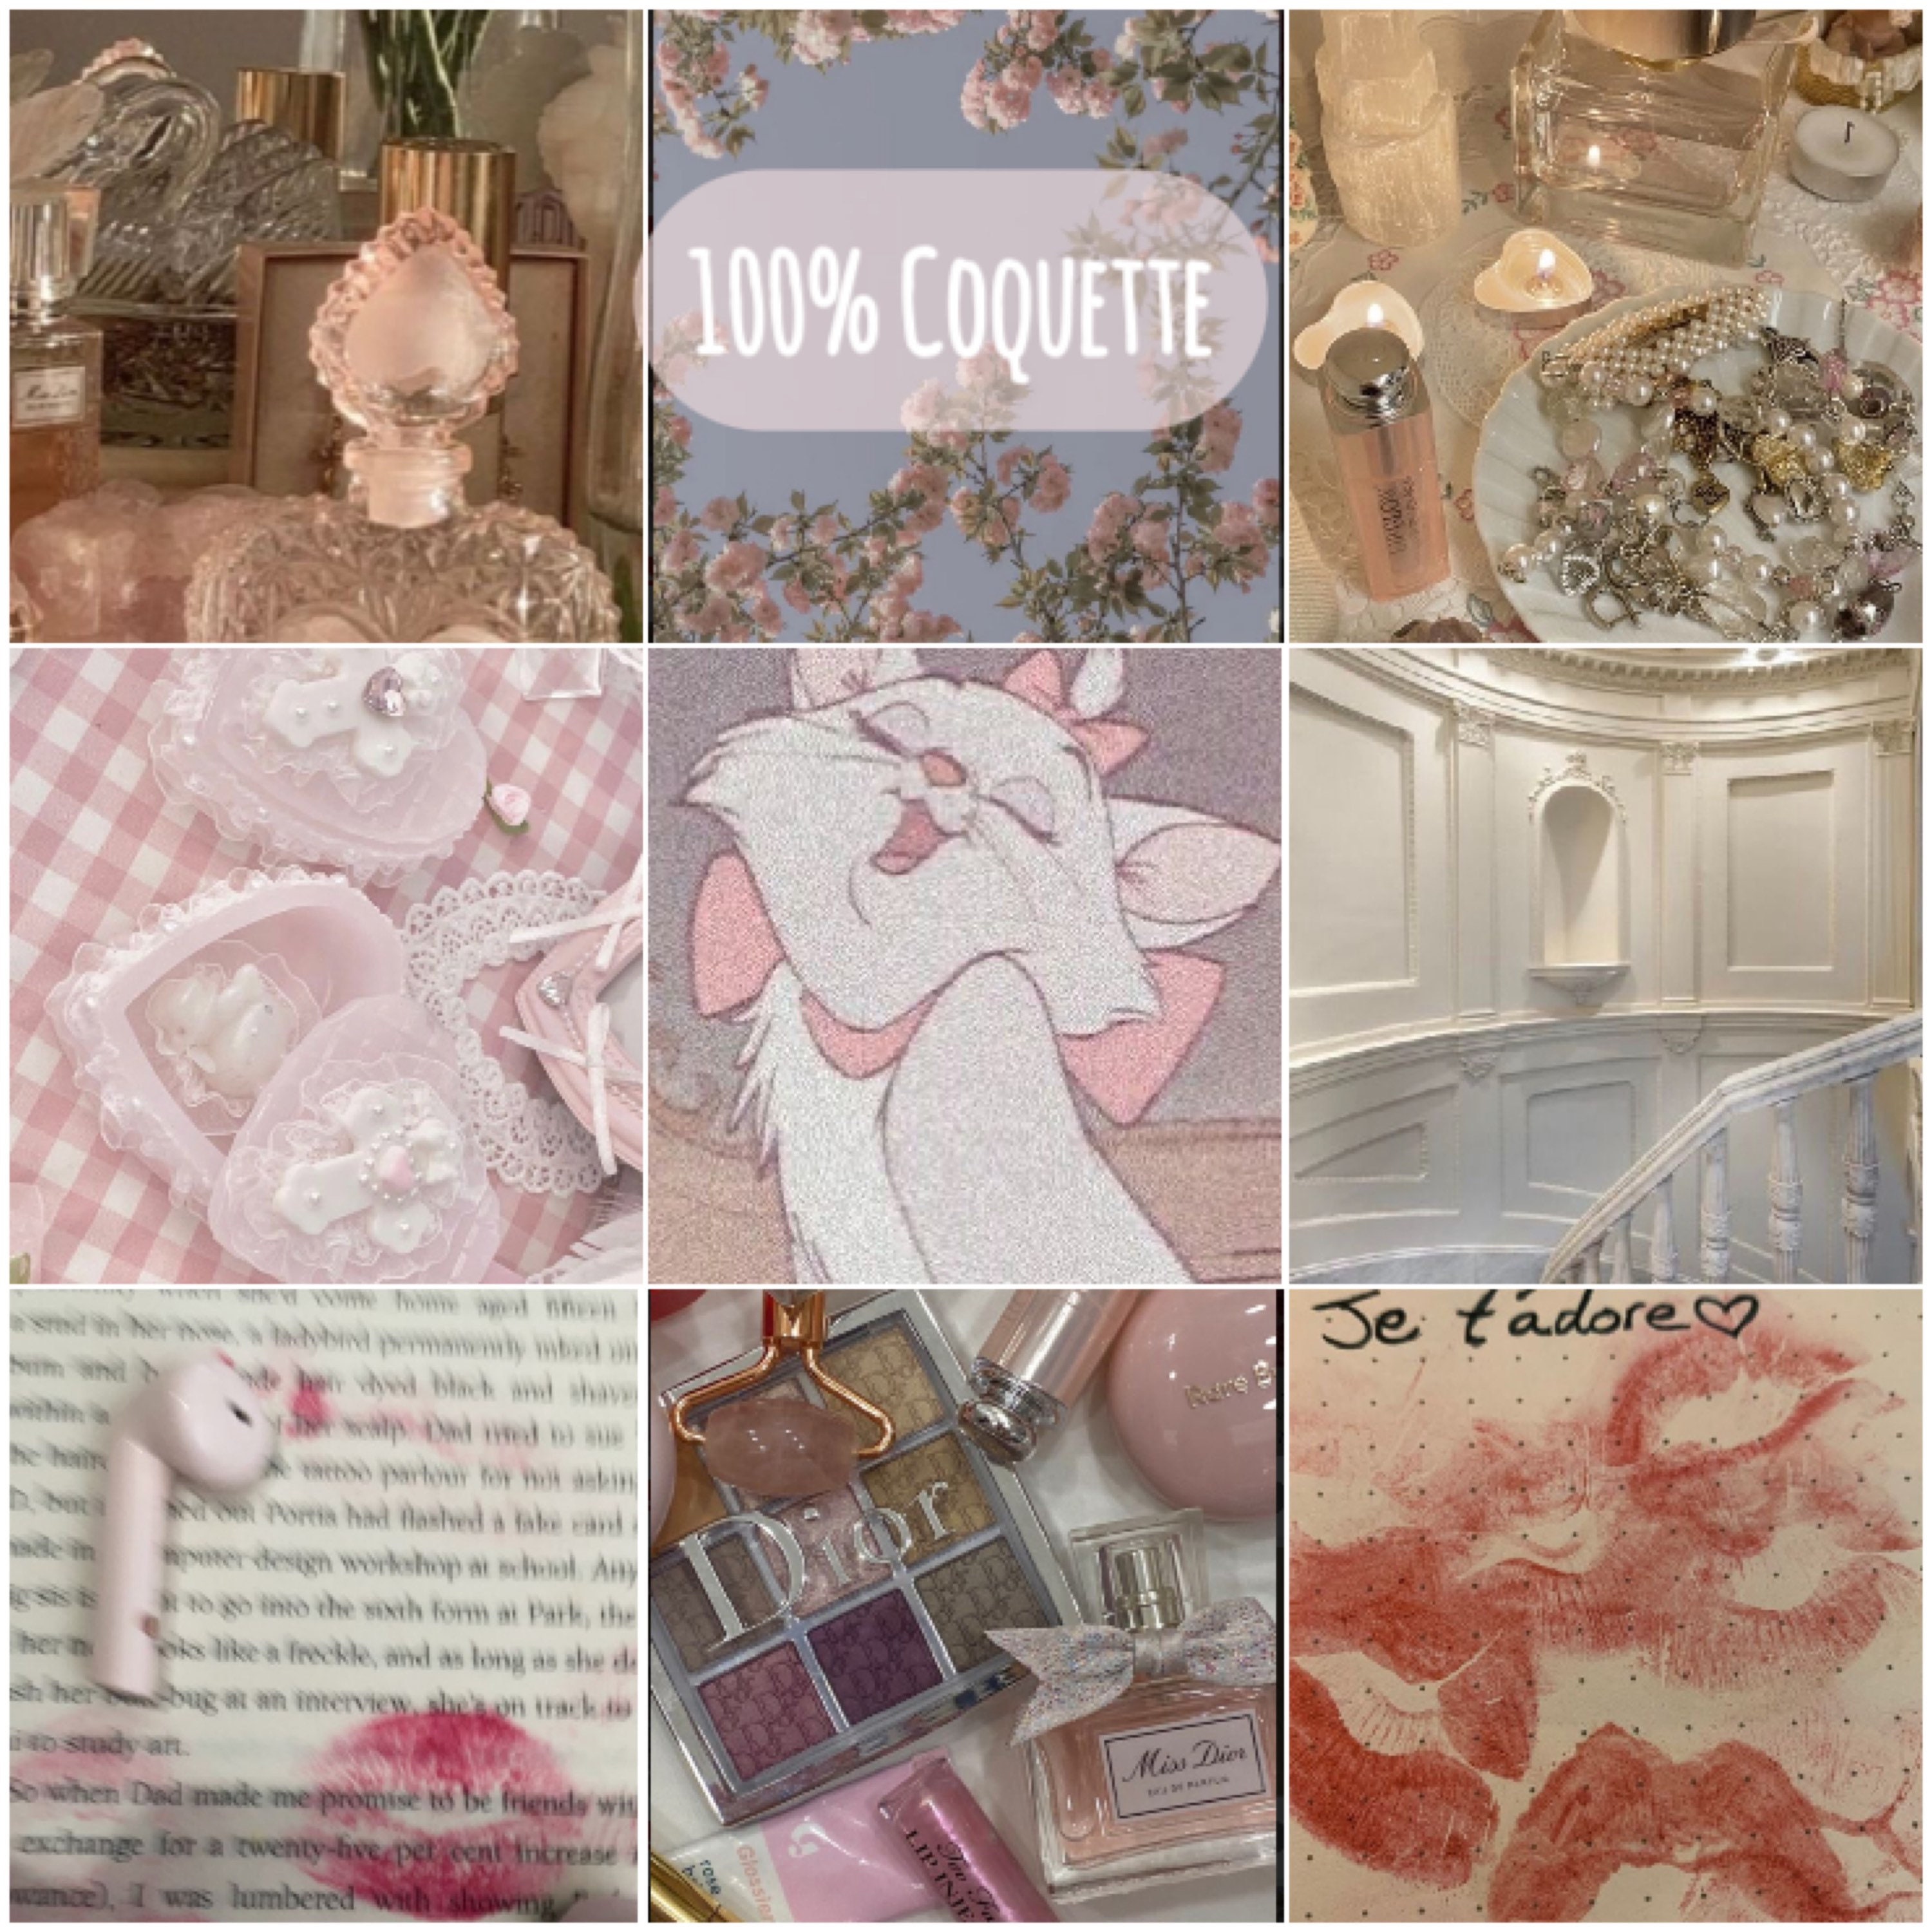 97 Decor Coquette Room Decor - Pink Coquette Posters, Coquette Aesthetic  Room Decor, Vintage Coquette Decor, Coquette Wall Decor, Coquette Photo  Collage Pack Bedroom Pictures (20x25 Free No Framed : : Home